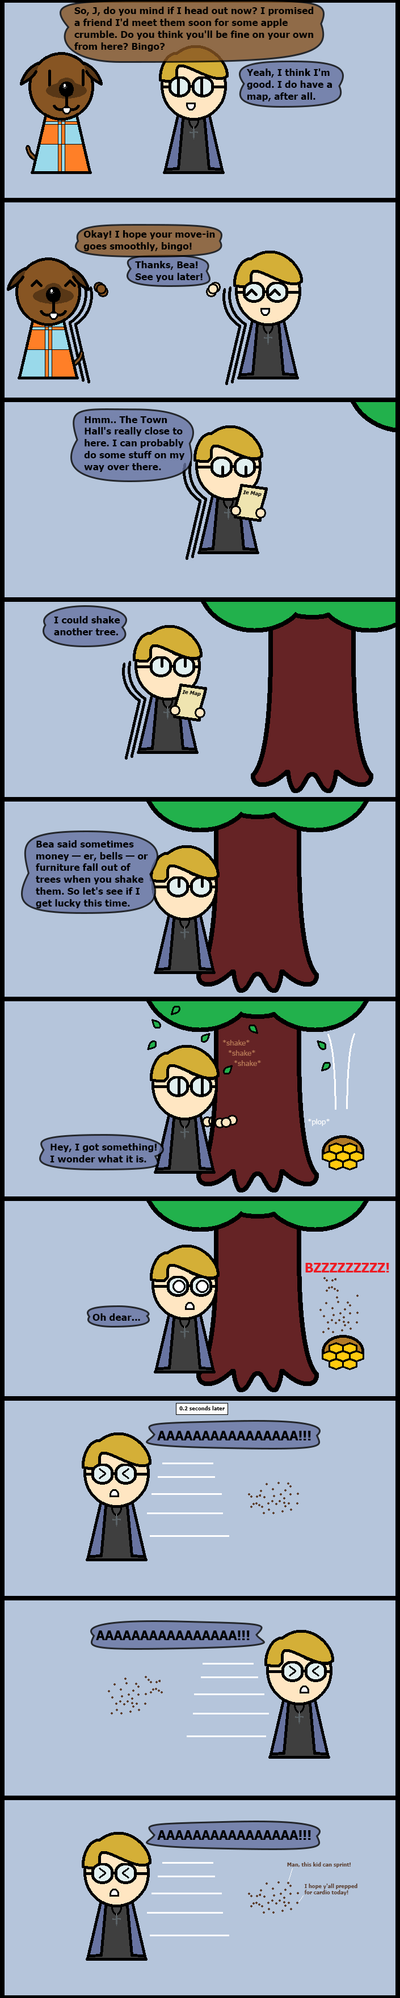 animal_crossing_chibi_comic_4___tree_cautions_by_just_call_me_j-daci1ve.png